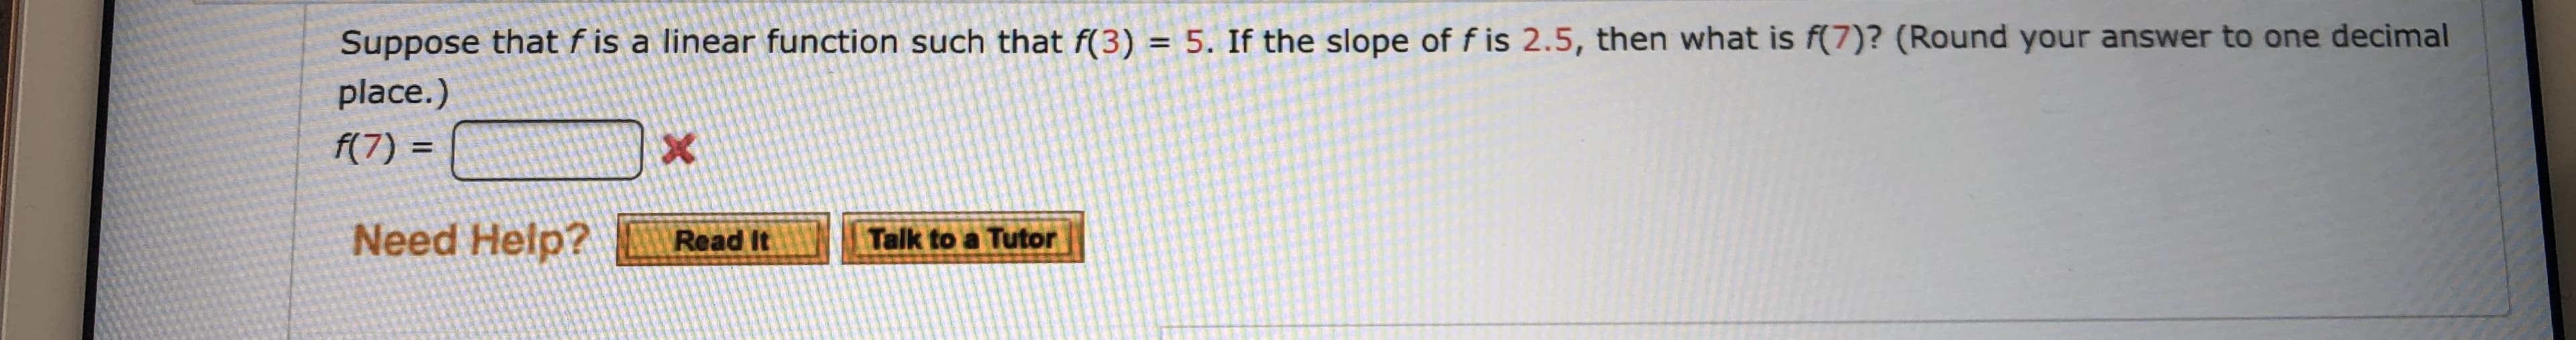 Suppose that f is a linear function such that f(3) = 5. If the slope of f is 2.5, then what is f(7)? (Round your answer to one decimal
place.)
f(7) =
Need Help?
Talk to a Tutor
Read It
